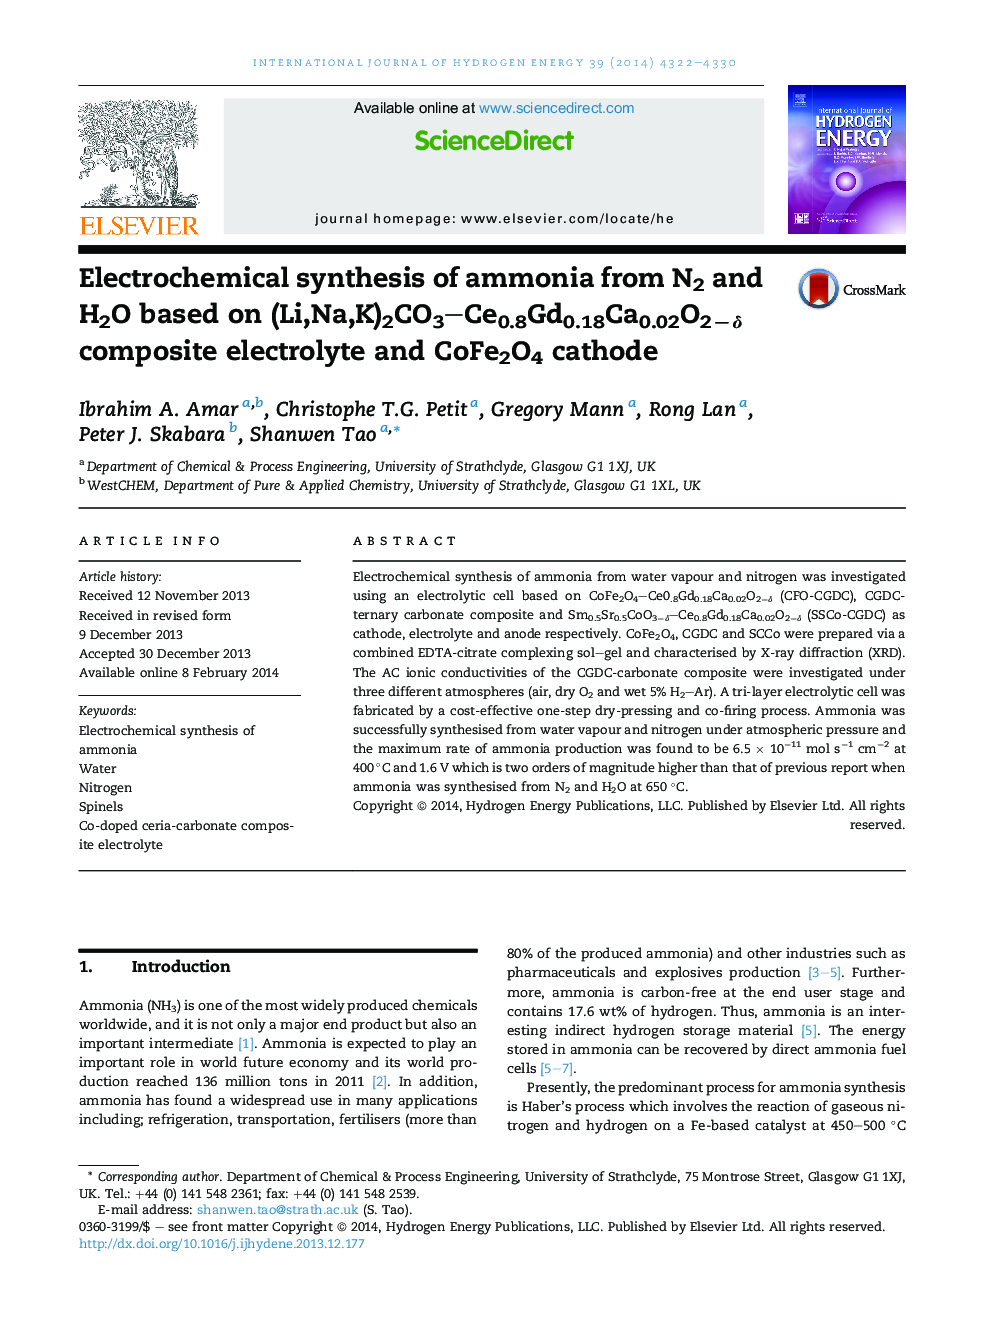 Electrochemical synthesis of ammonia from N2 and H2O based on (Li,Na,K)2CO3–Ce0.8Gd0.18Ca0.02O2−δ composite electrolyte and CoFe2O4 cathode